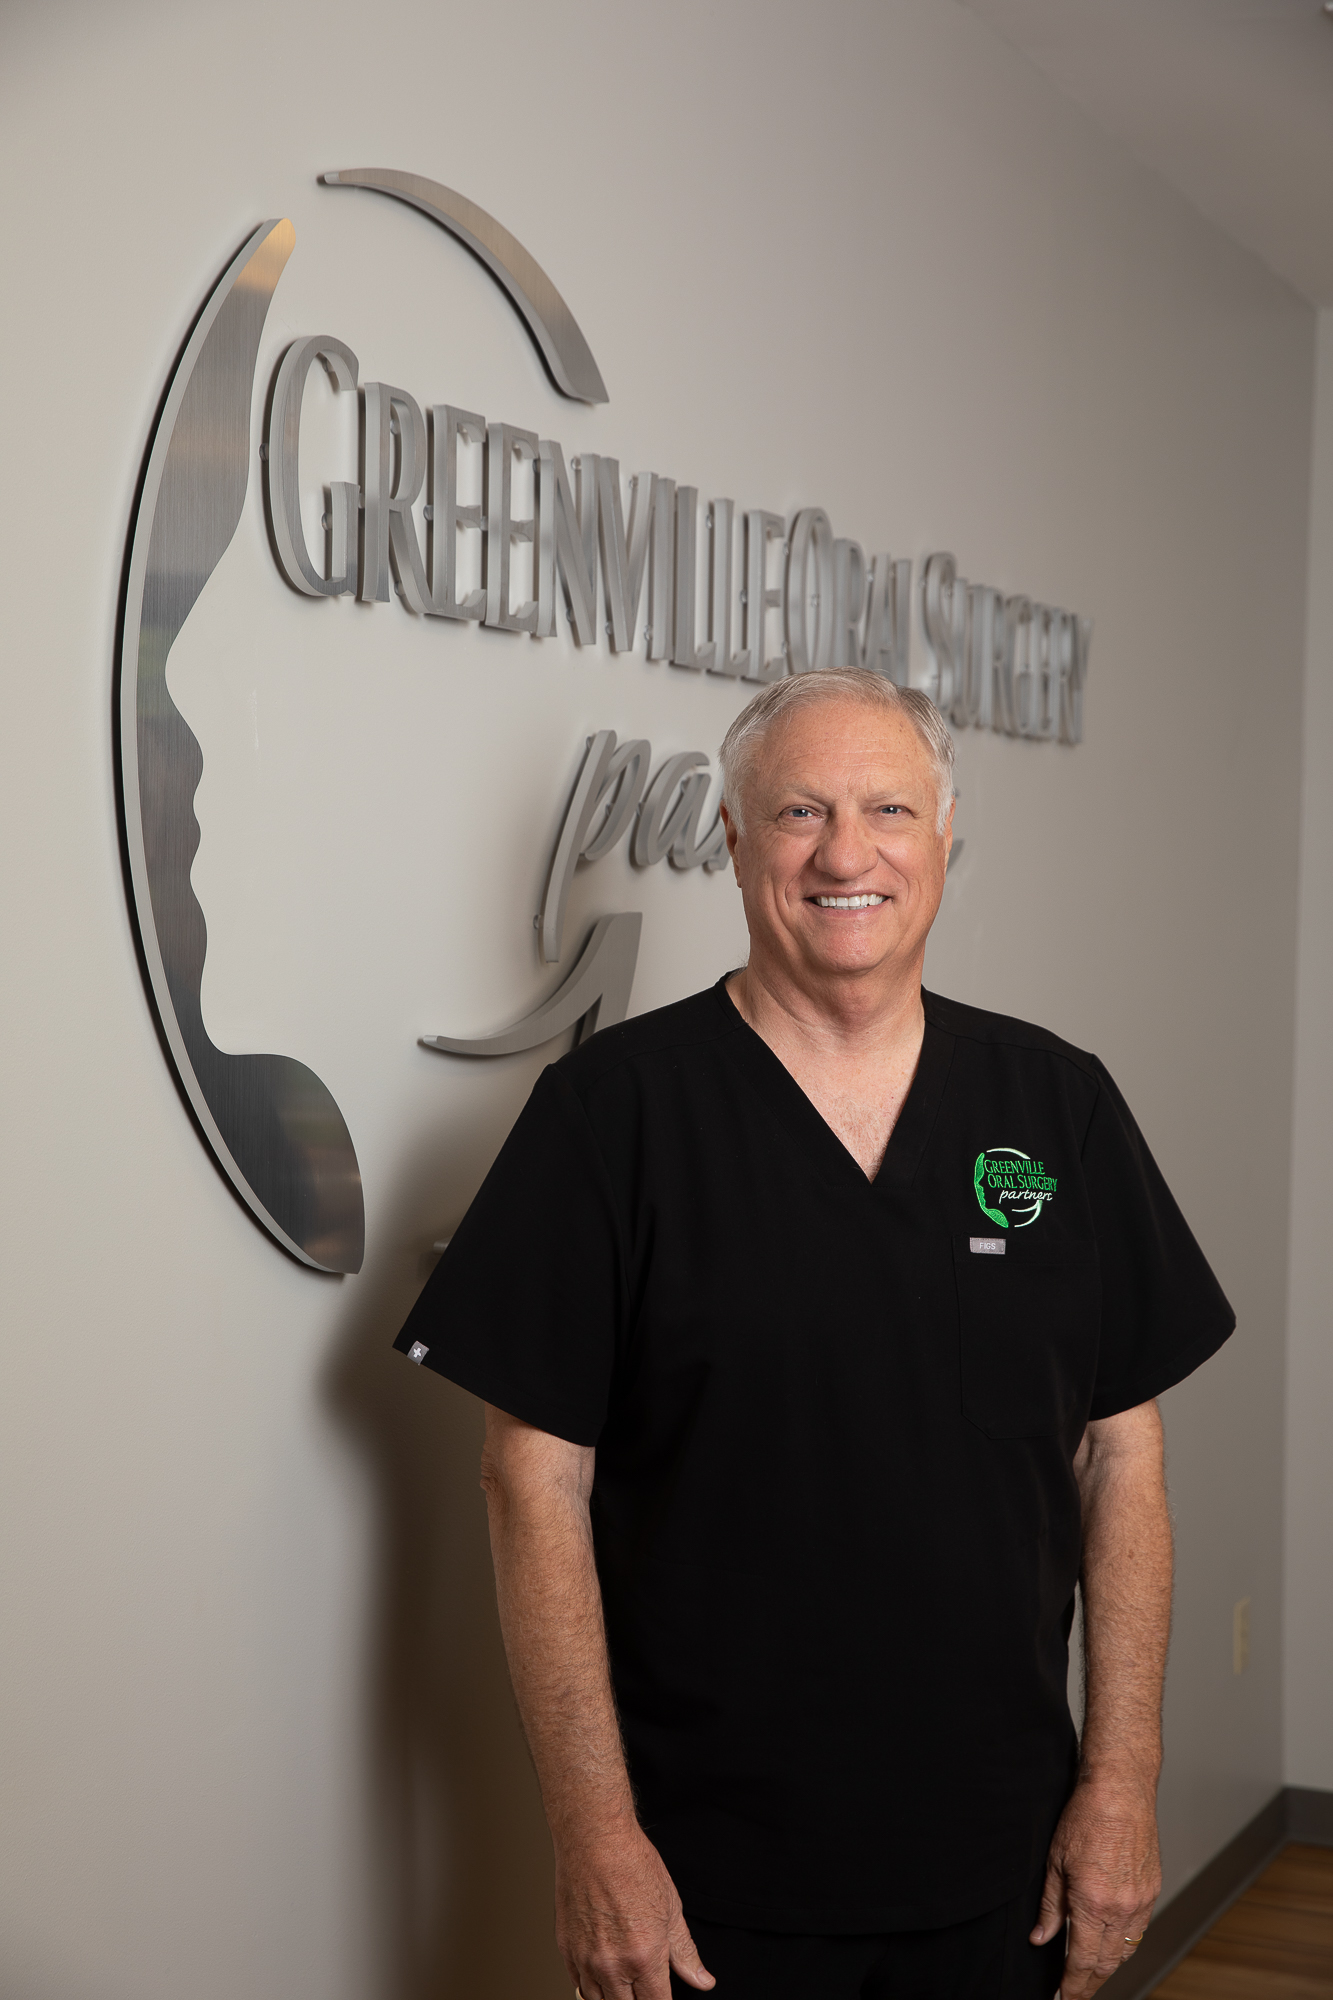 Dr Larry W. Cobb, Oral Surgeon at Greenville Oral Surgery